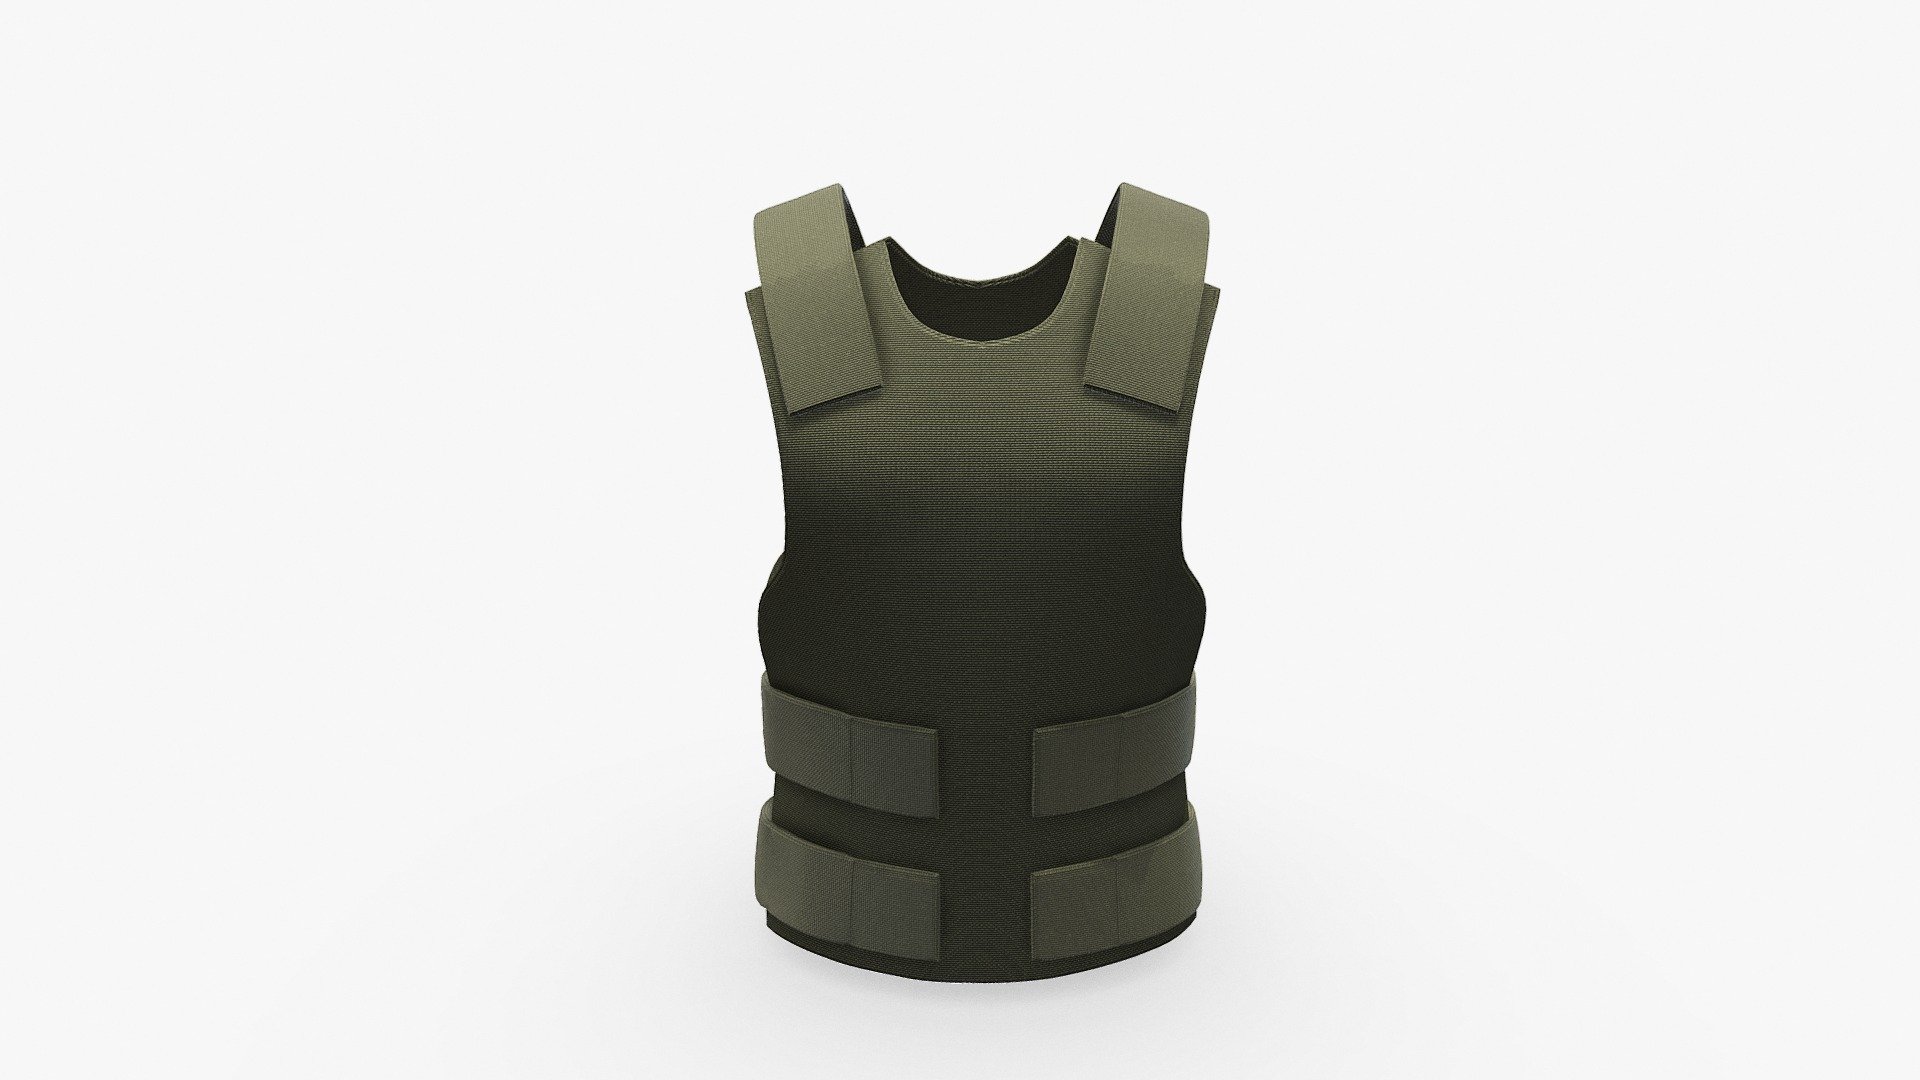 Body armor, also known as body armour, personal armor/armour, or a suit/coat of armour, is protective clothing designed to absorb or deflect physical attacks.

Software: Marvelous Designer &amp; Gimp.
The model was remeshed with marvelous designer software.
The model has textures and materials applied.

Please leave a like and subscribe for more models coming soon 3d model